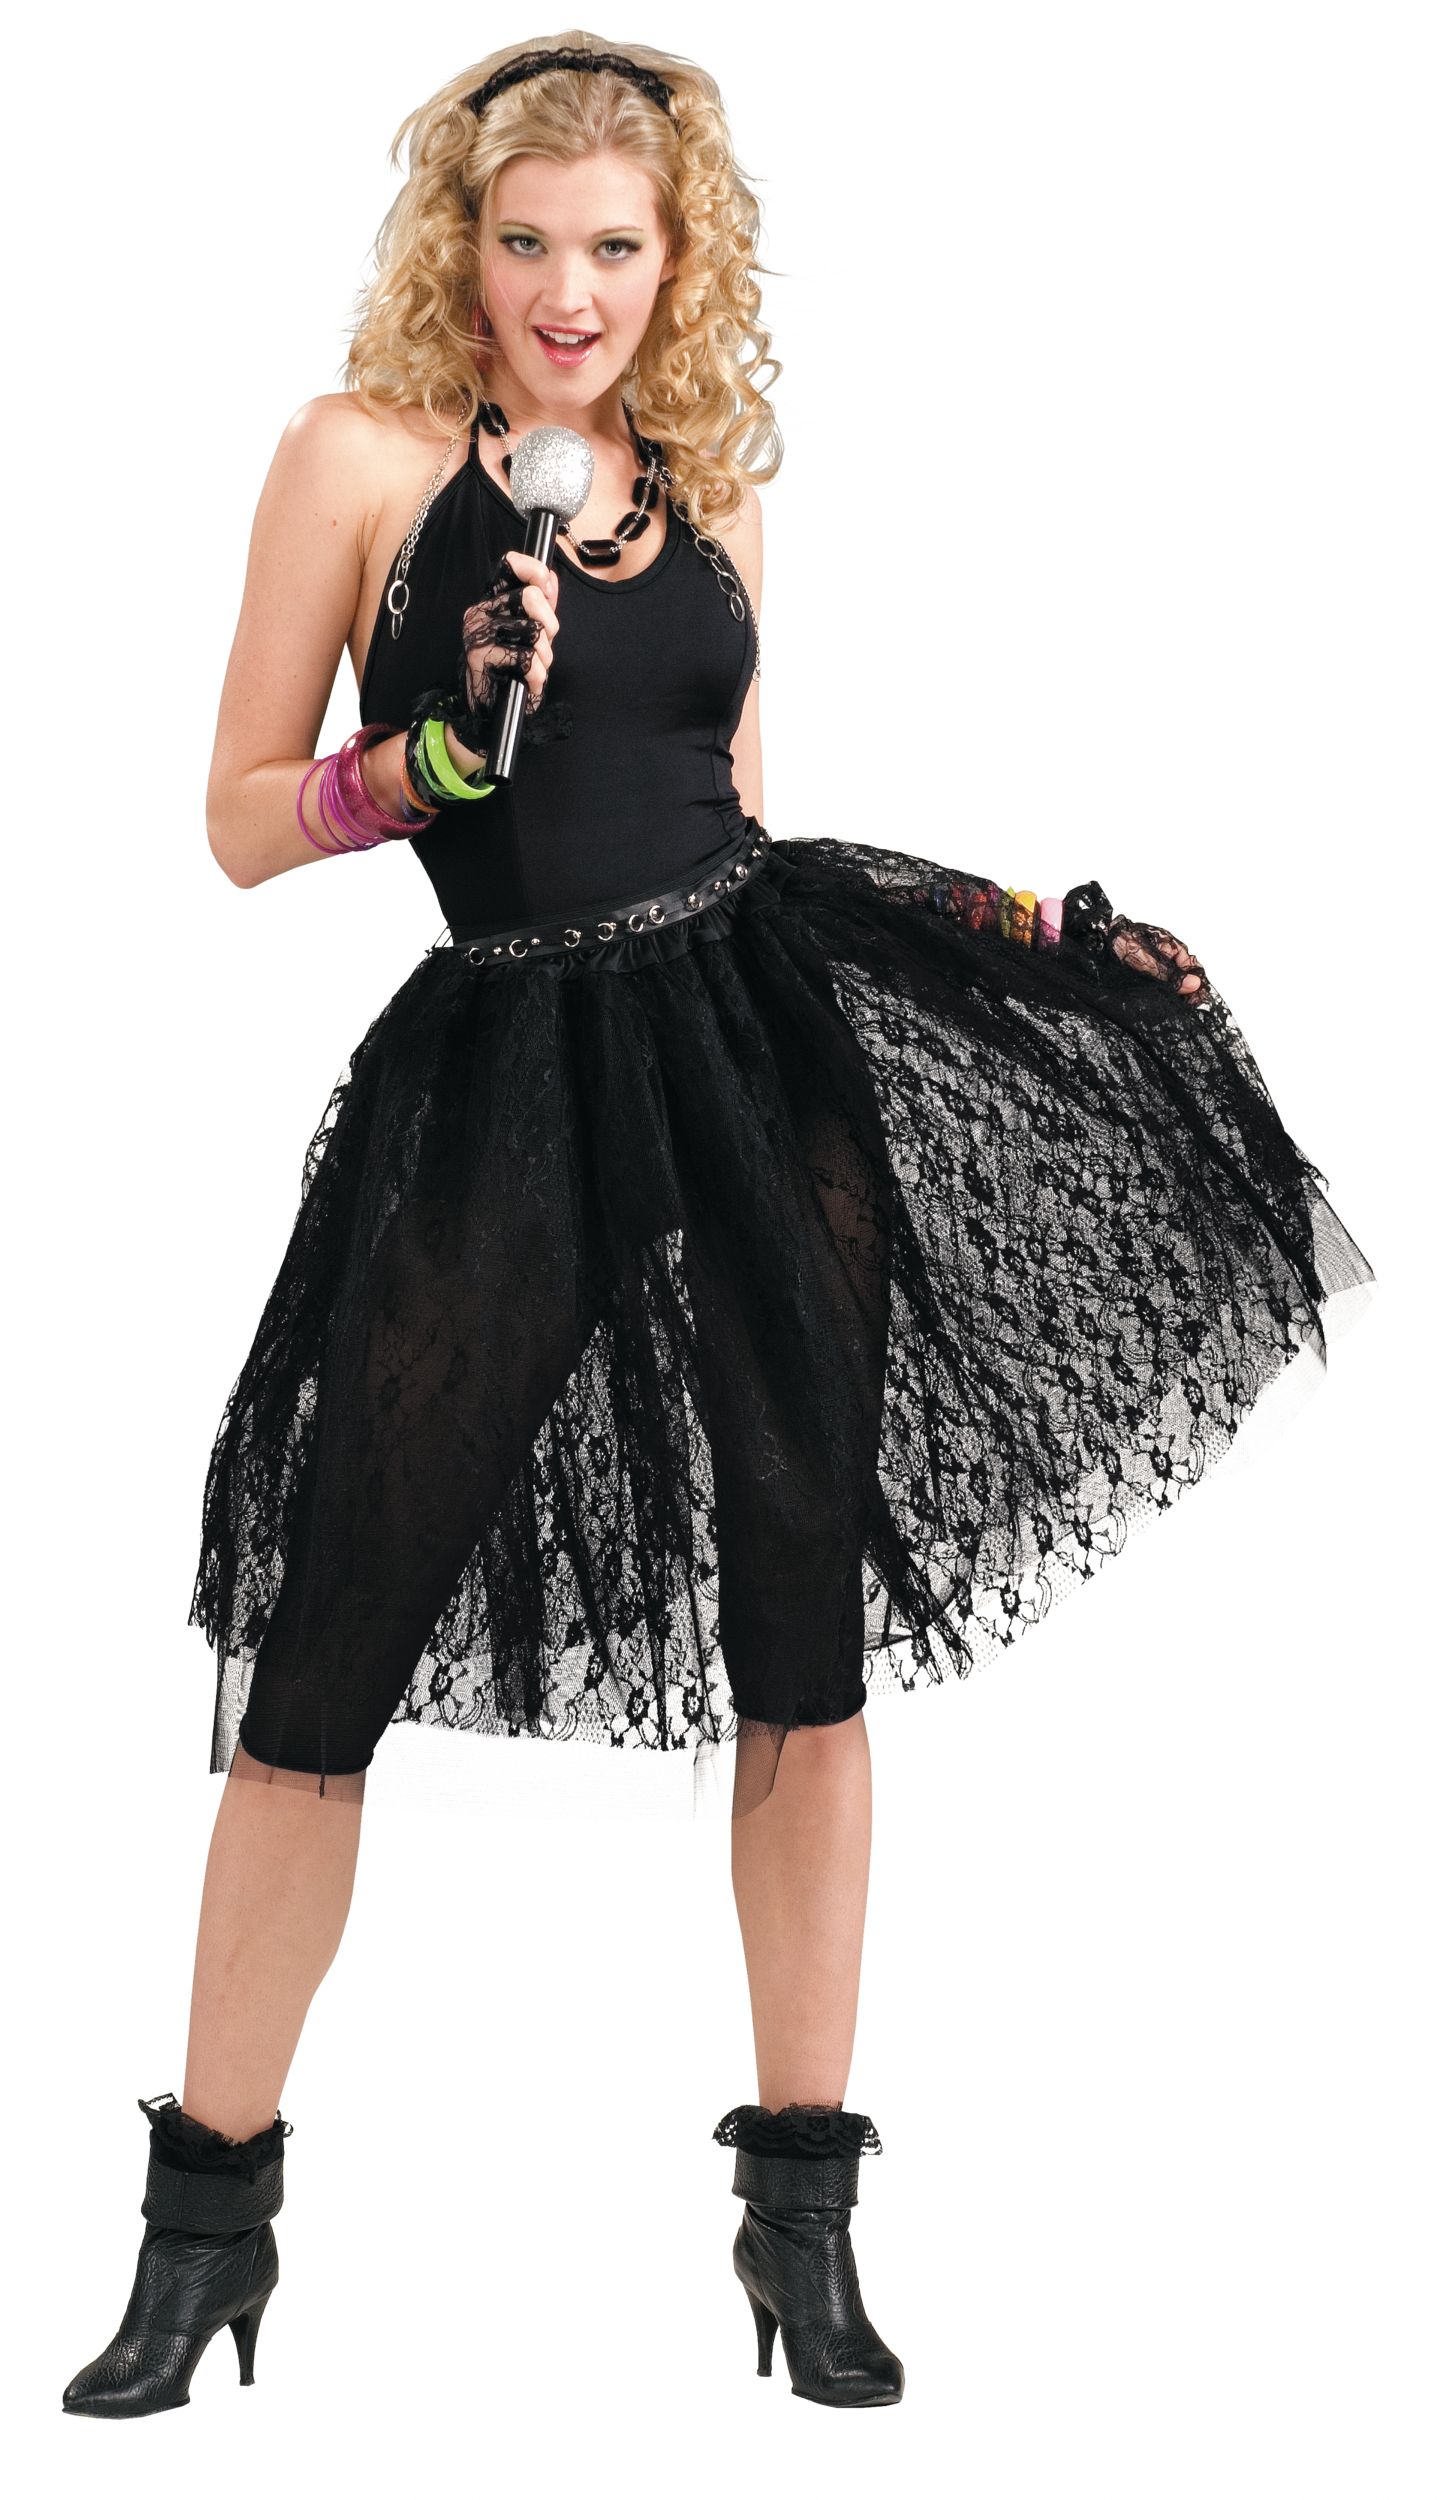 Adult 1980s Lace Tulle Pop Skirt, Black, One Size, Wearable Costume  Accessory for Halloween